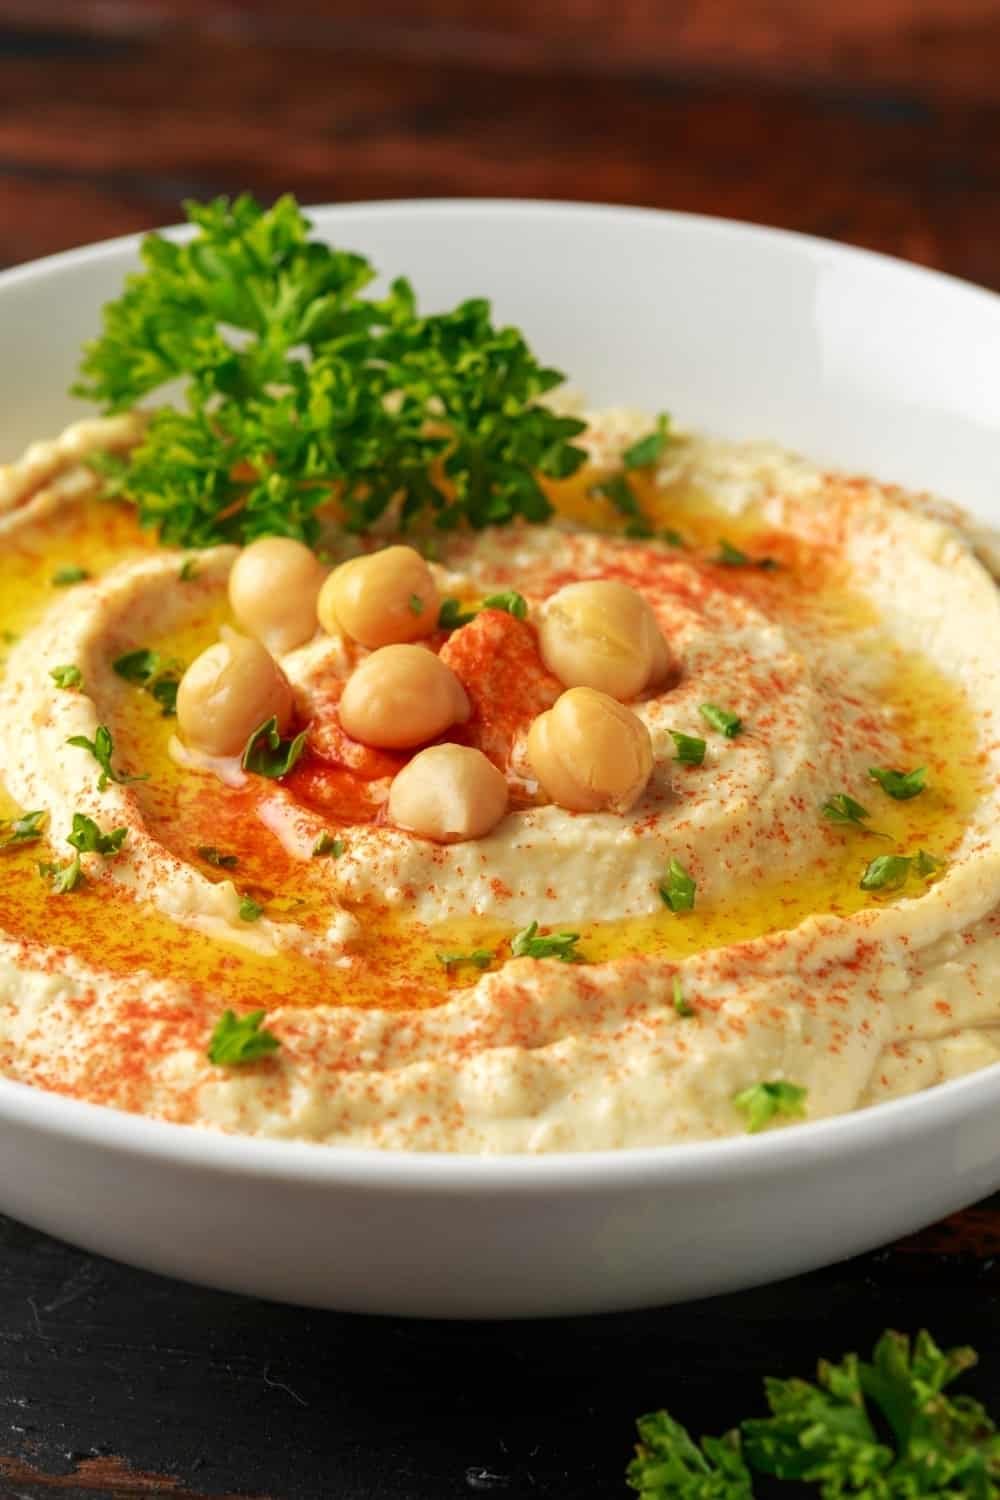 hummus in a white plate on the table